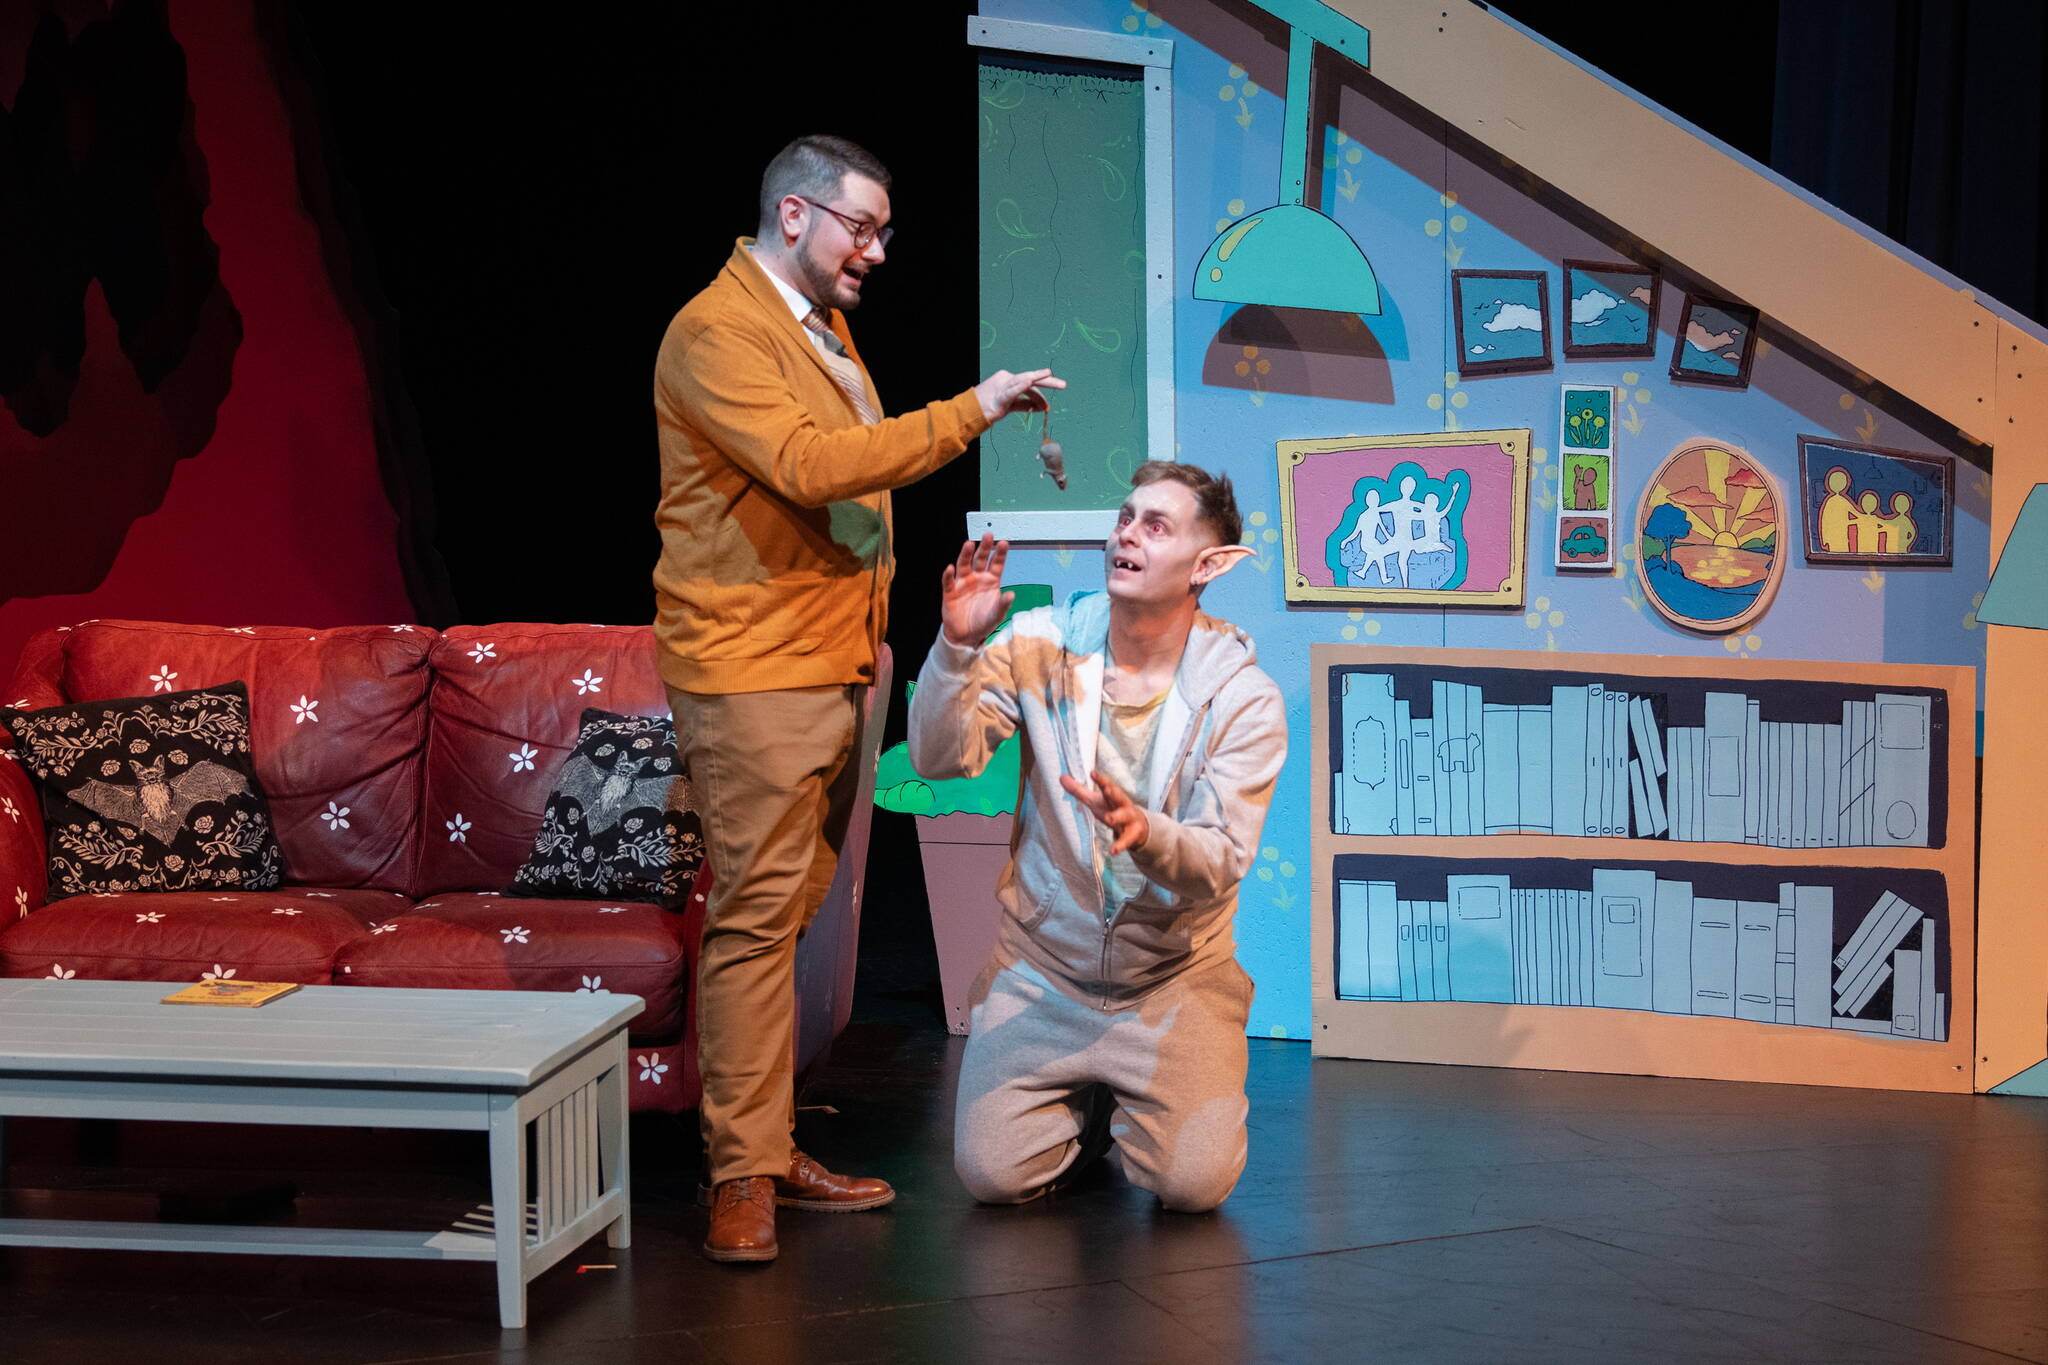 Steven Arends (left) feeds Joshua Midgett in Juneau Ghost Light Theatre’s production of “Bat Boy: The Musical,” which is being staged through March 17 at Thunder Mountain High School. (Cam Byrnes/ Juneau Ghost Light Theatre)